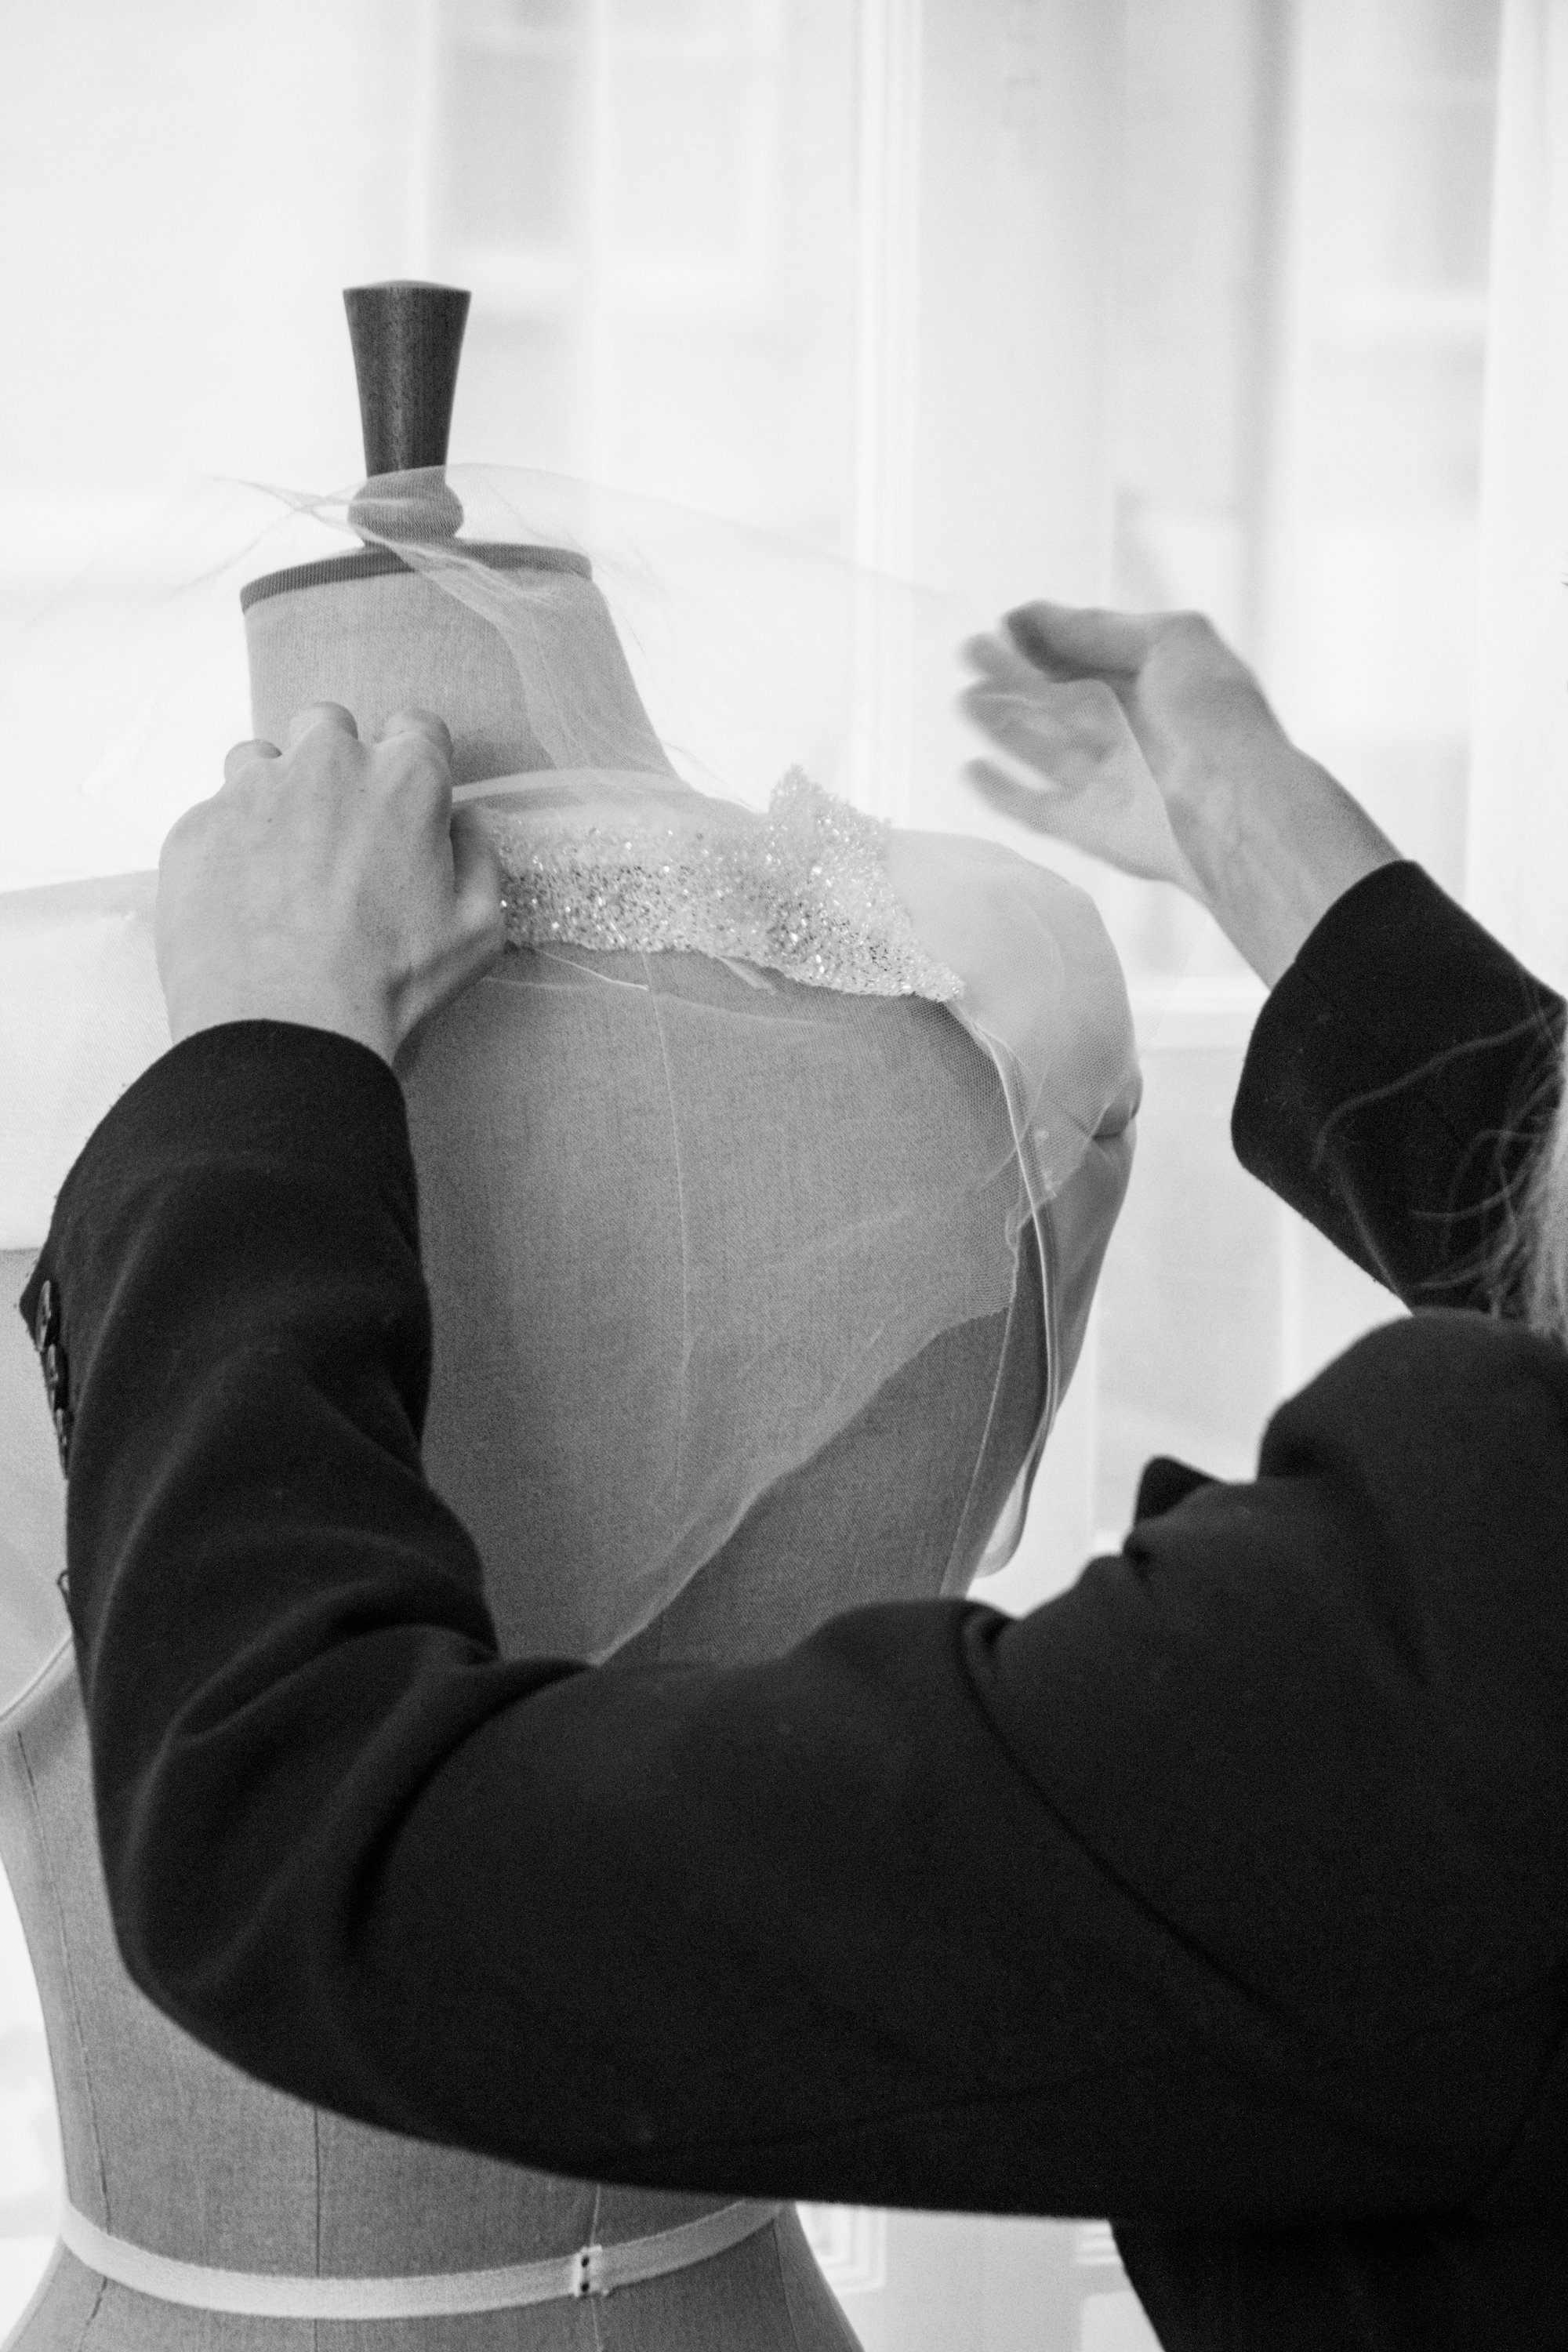 Behind the scenes in the Halfpenny London atelier. Crafting the Elder Cape